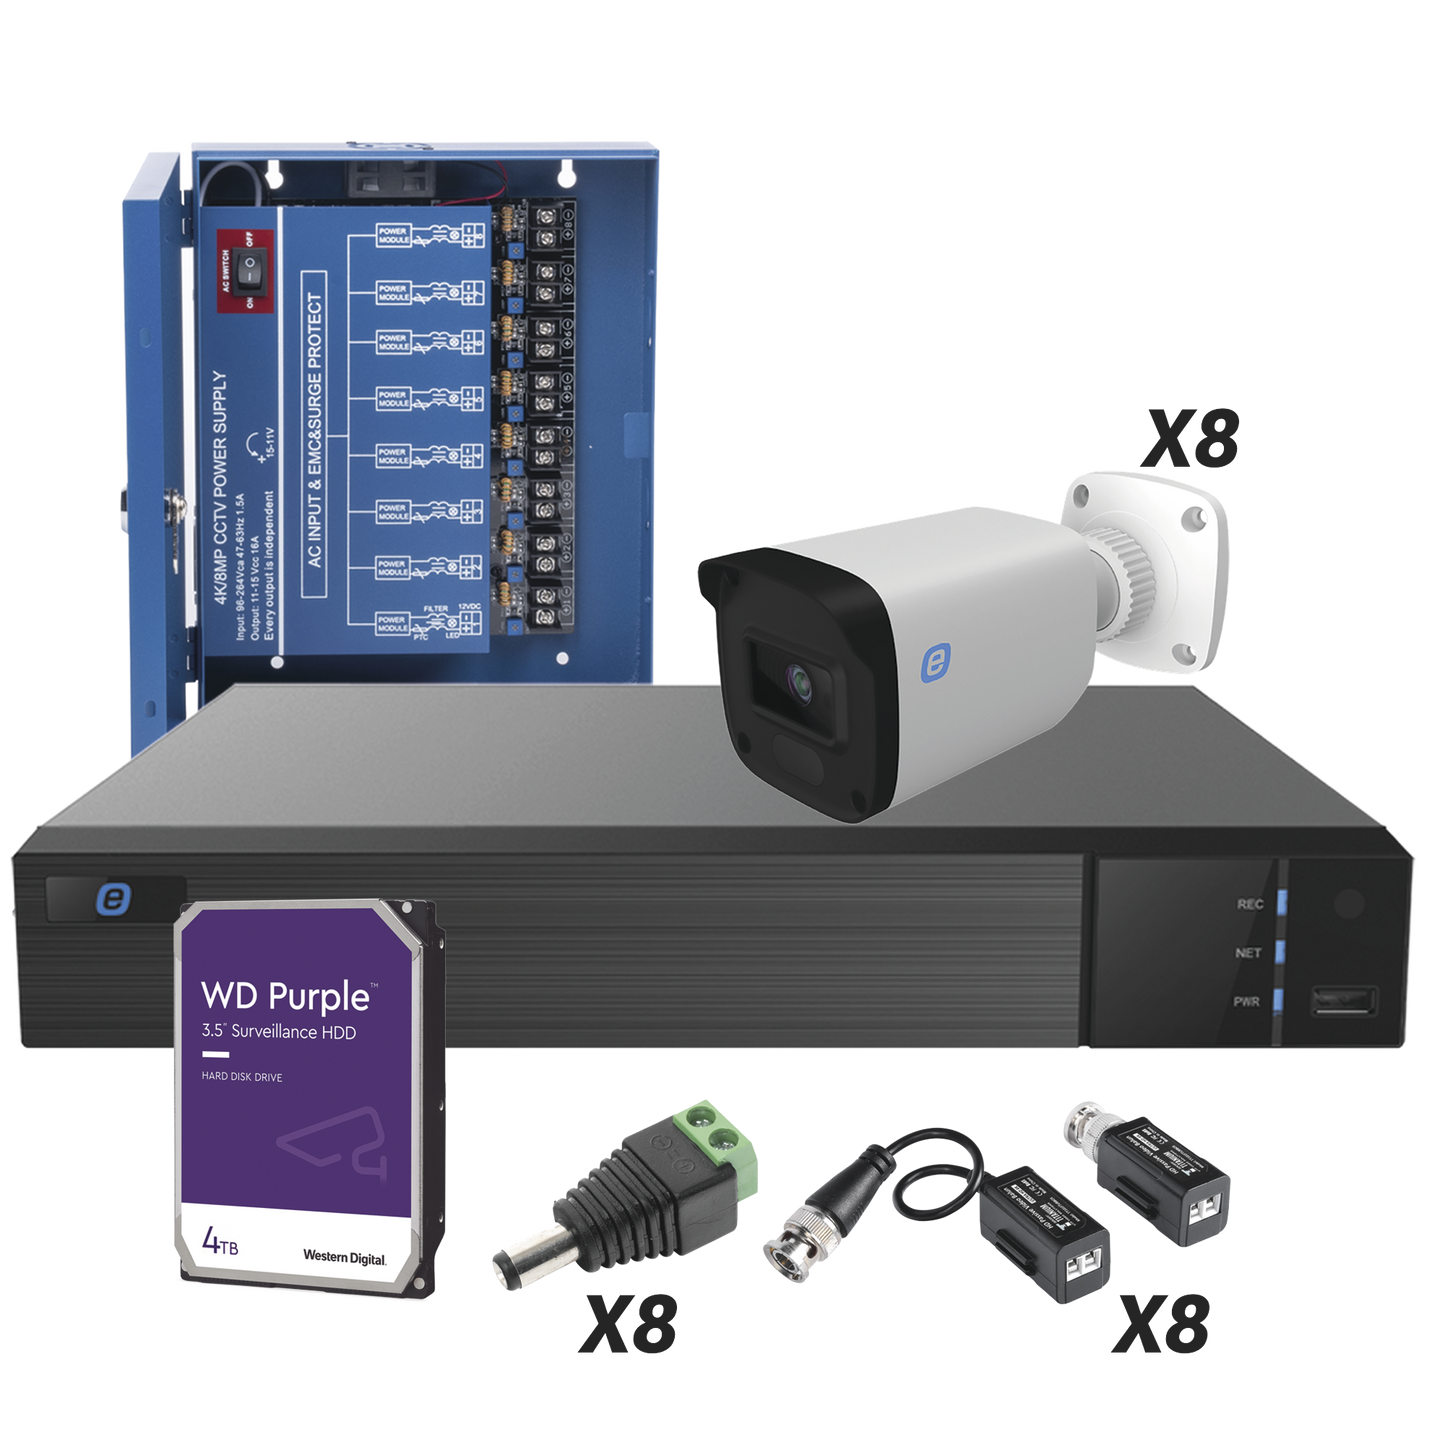 TURBO HD 5MP KIT FULL COLOR / DVR 8 Channels / 8 Bullet Cameras 5MP color 24/7 / HDD / Power Supply / Transceivers / Connectors